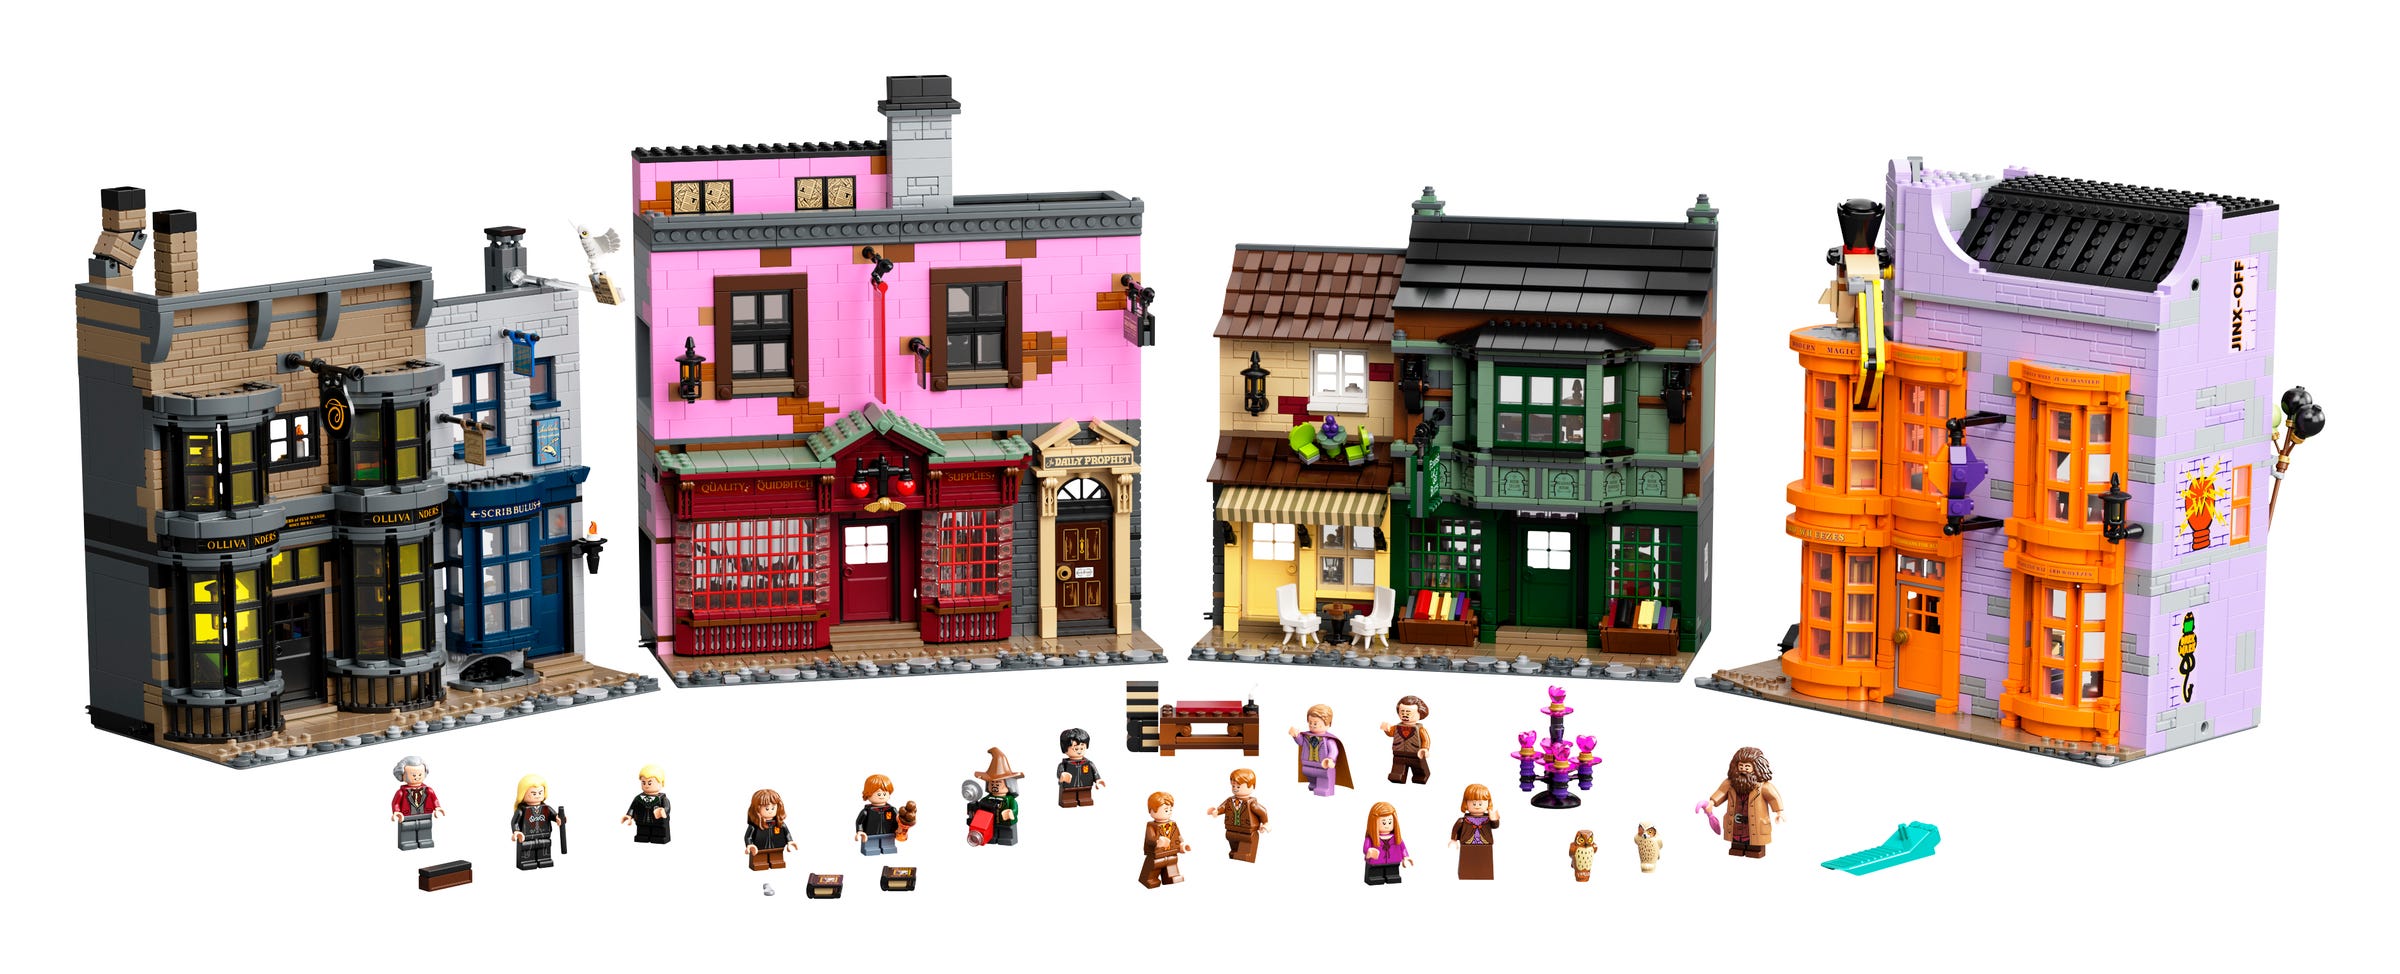 Could LEGO expand the Diagon Alley 2020 set (75978) by adding Gringotts Bank?